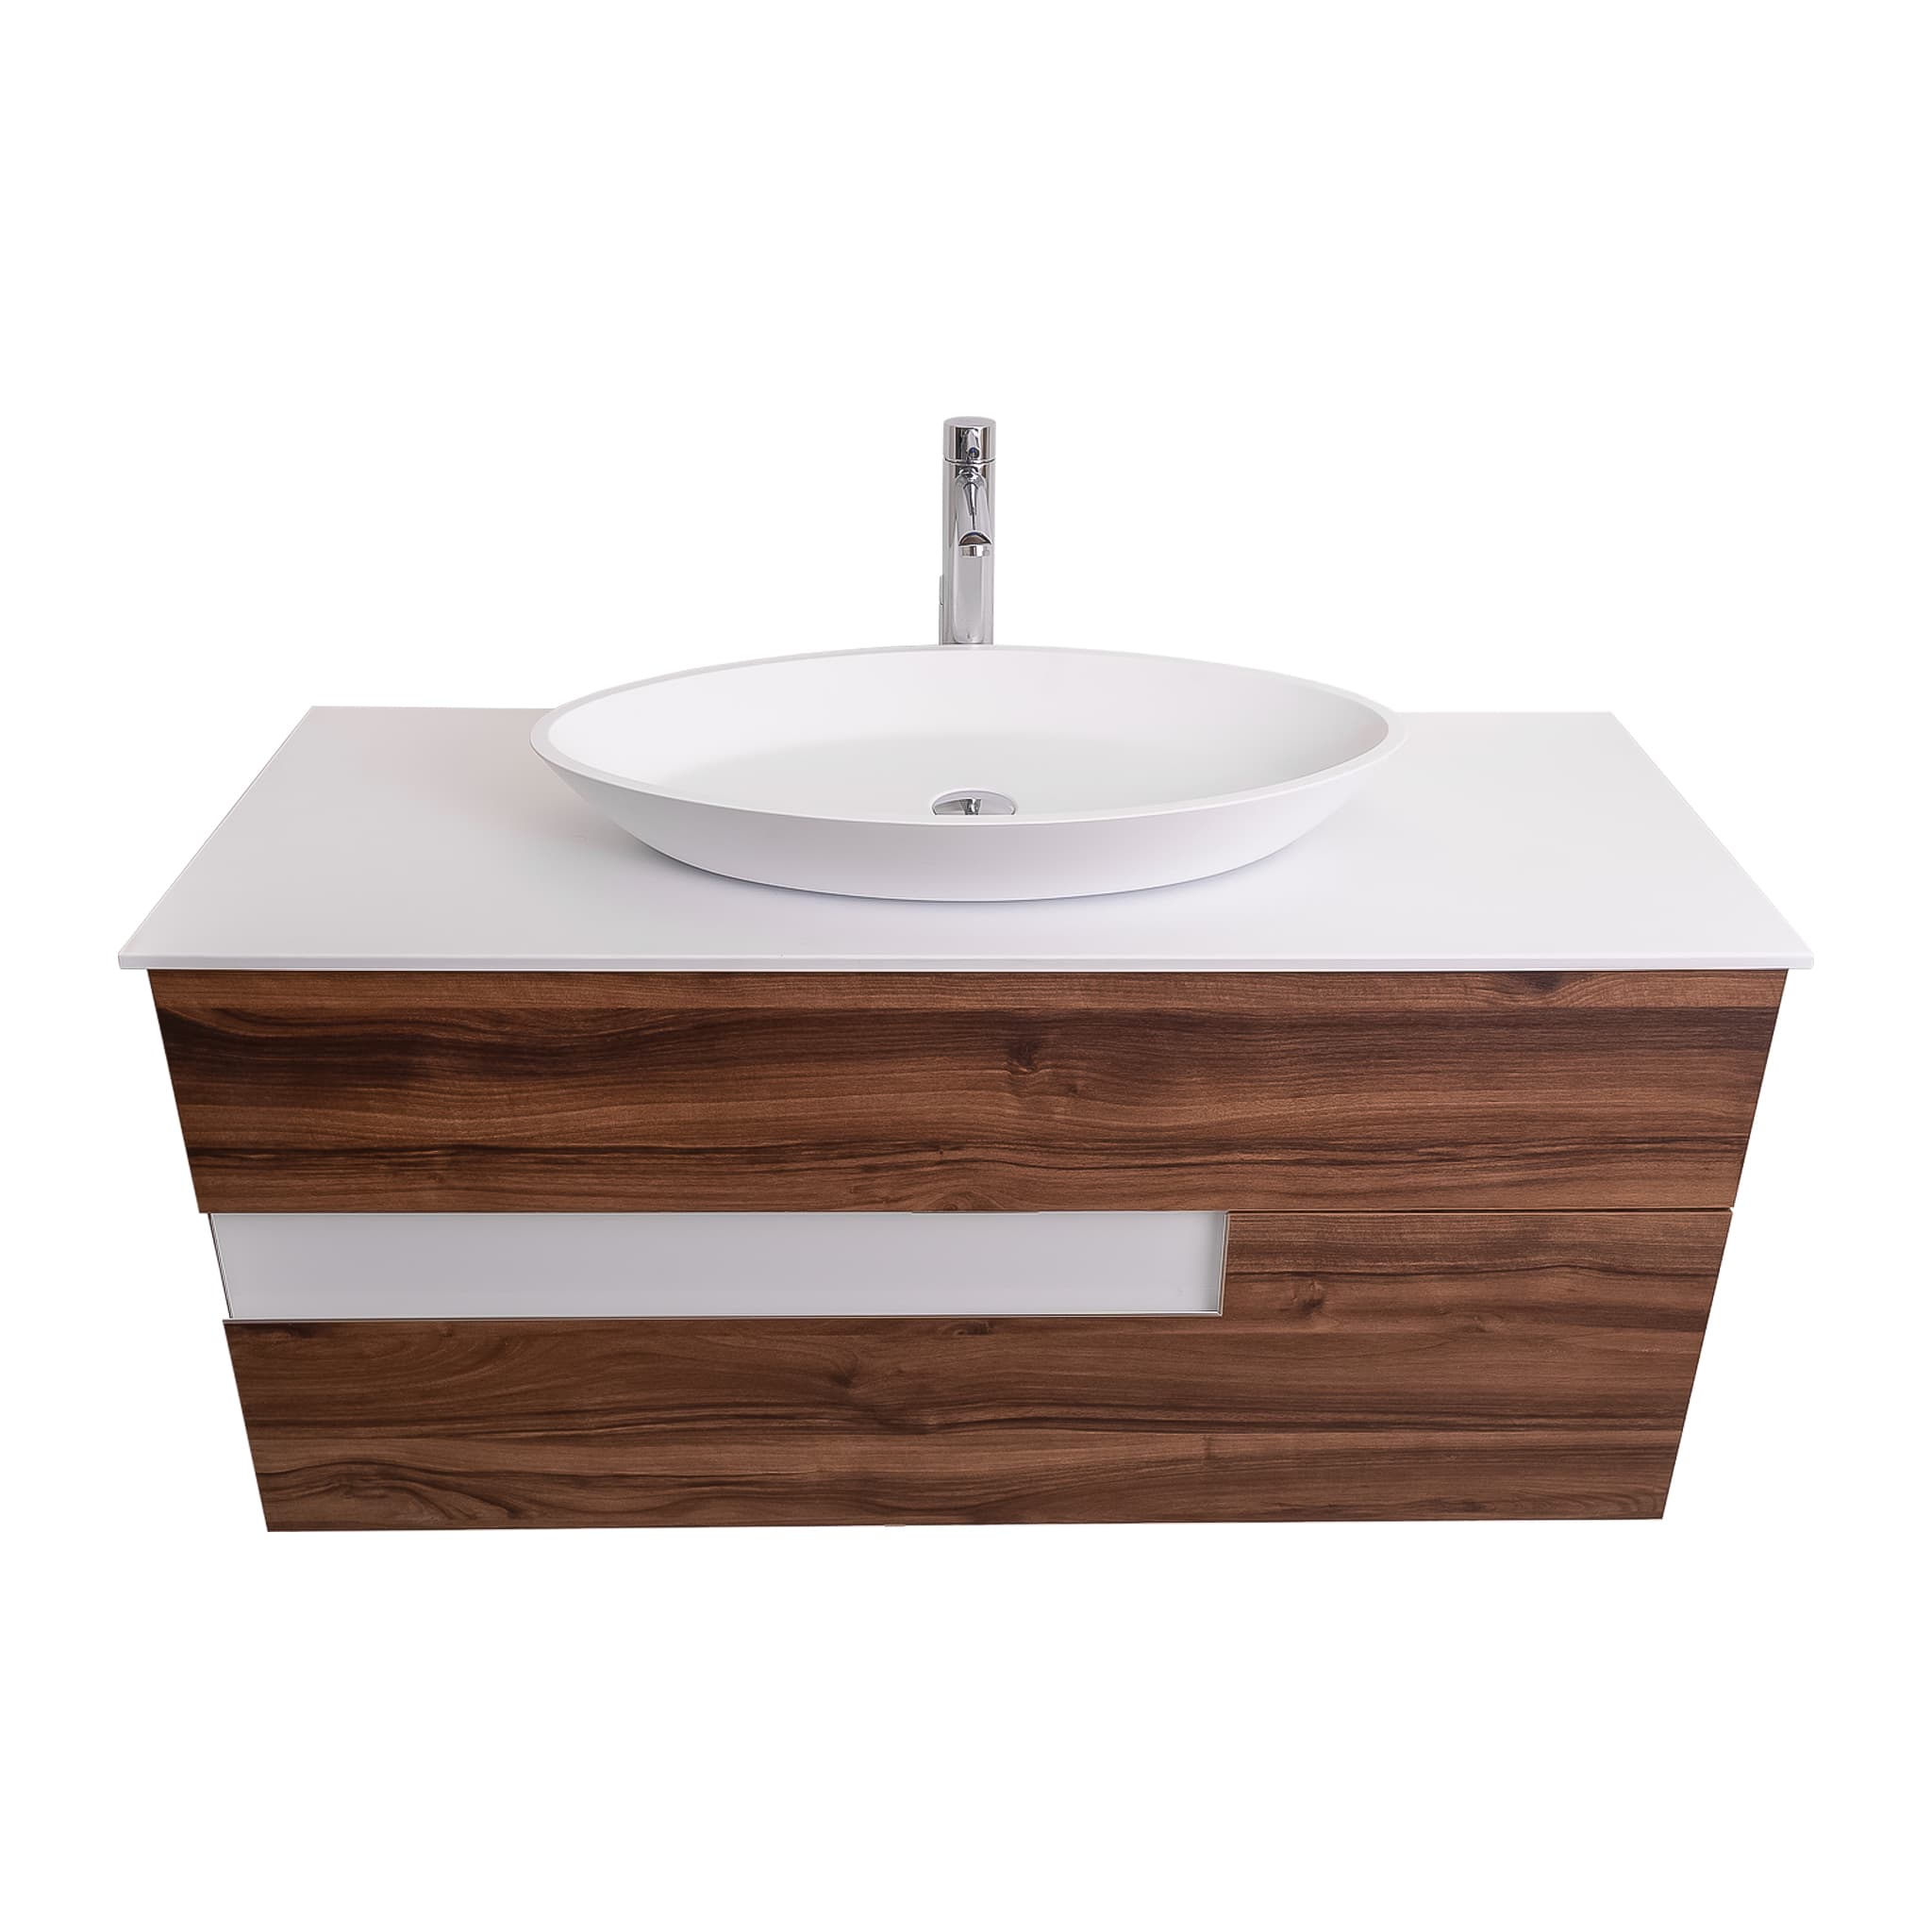 Vision 47.5 Valenti Medium Brown Wood Cabinet, Solid Surface Flat White Counter And Oval Solid Surface White Basin 1305, Wall Mounted Modern Vanity Set